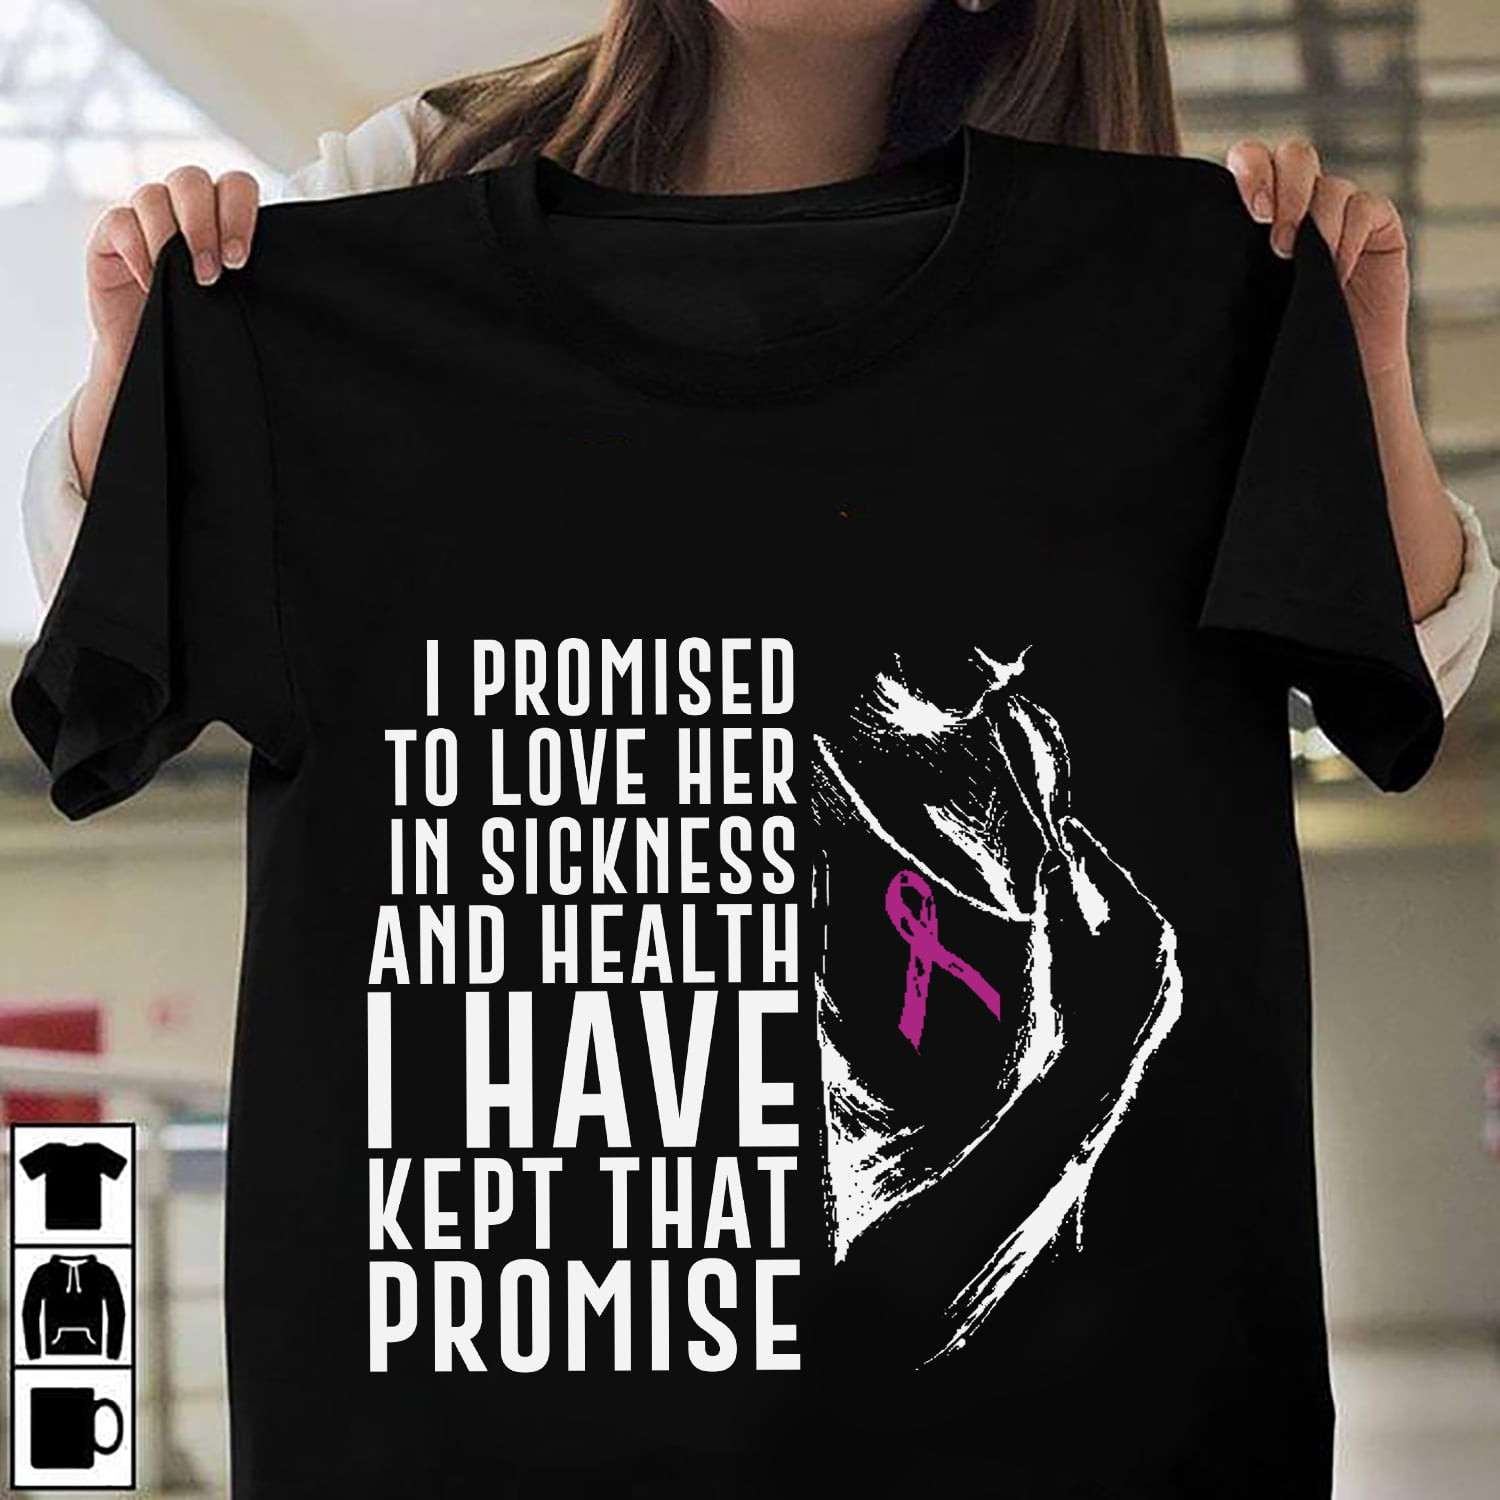 I promised to love her in sickness and health - Breast cancer awareness, breast cancer survivor gift